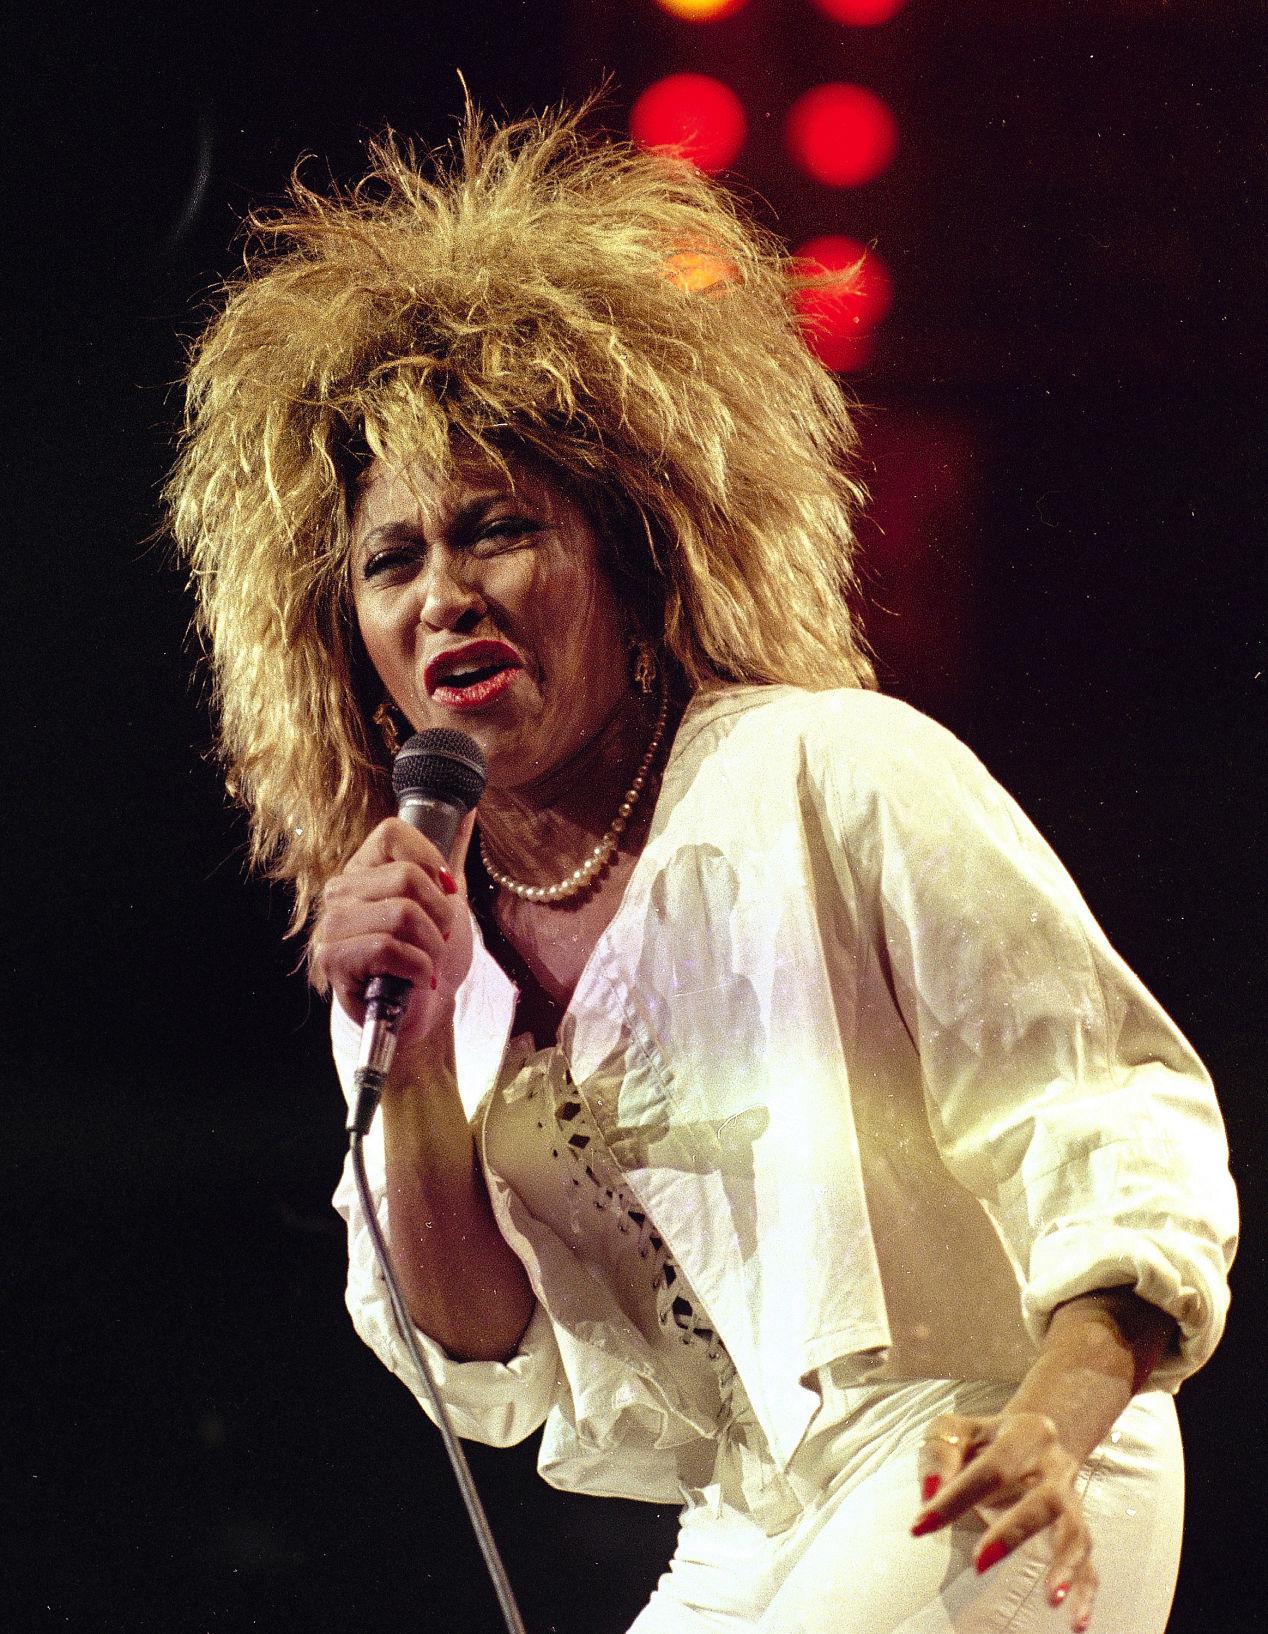 Photos Tina Turner turns 80 today. A look at her life, in images